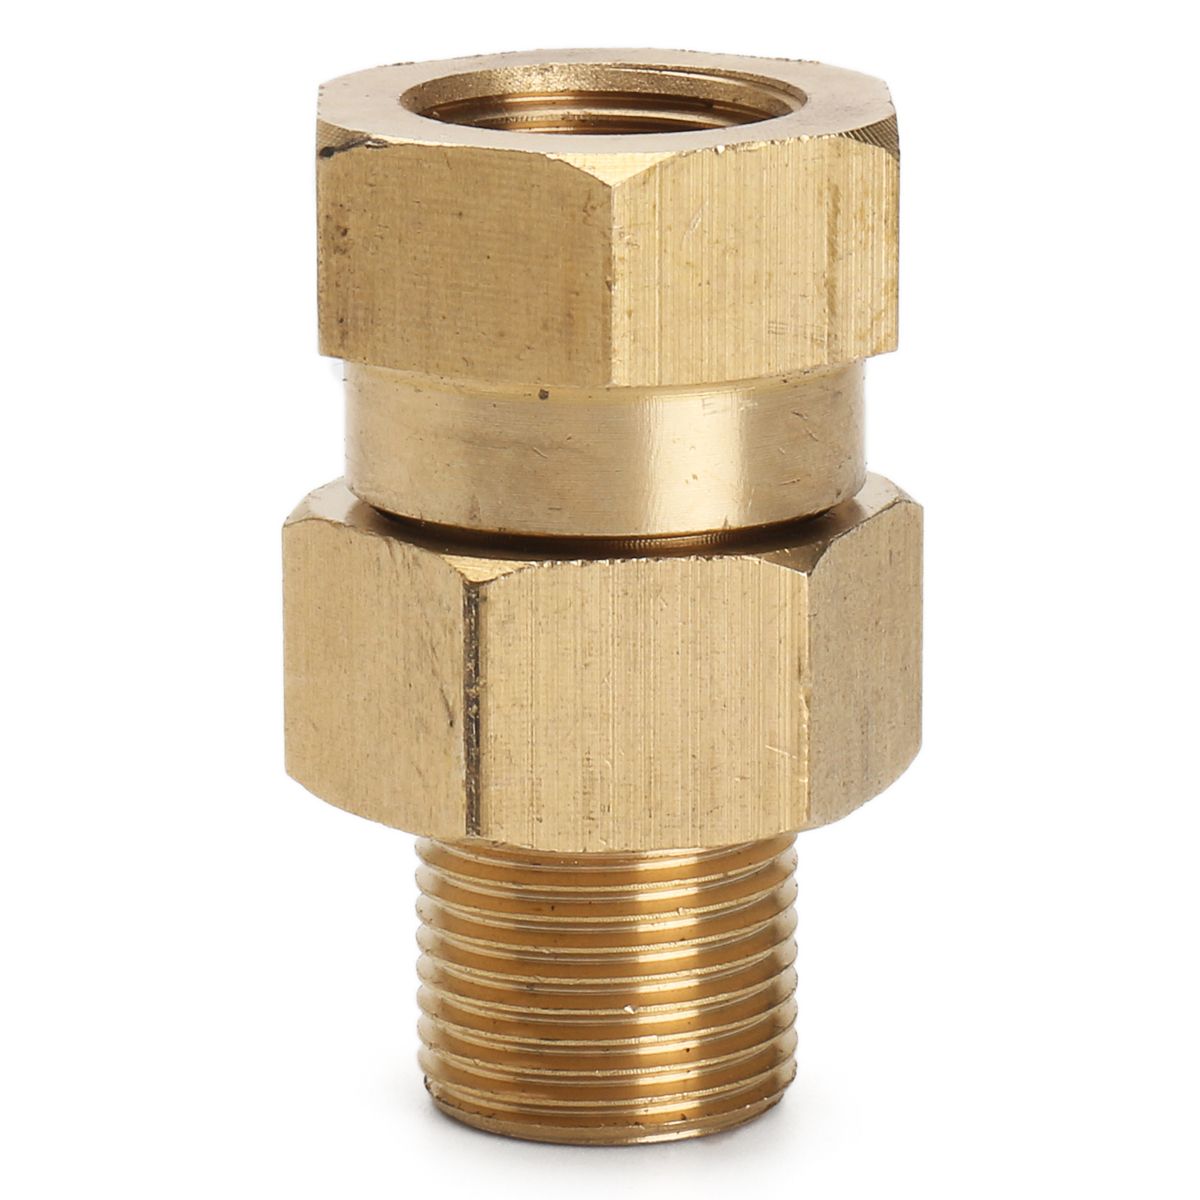 38-Inch-BSP-Brass-Pressure-Washer-Swivel-Adapter-Male-to-Female-Hose-Coulper-Fitting-1153375